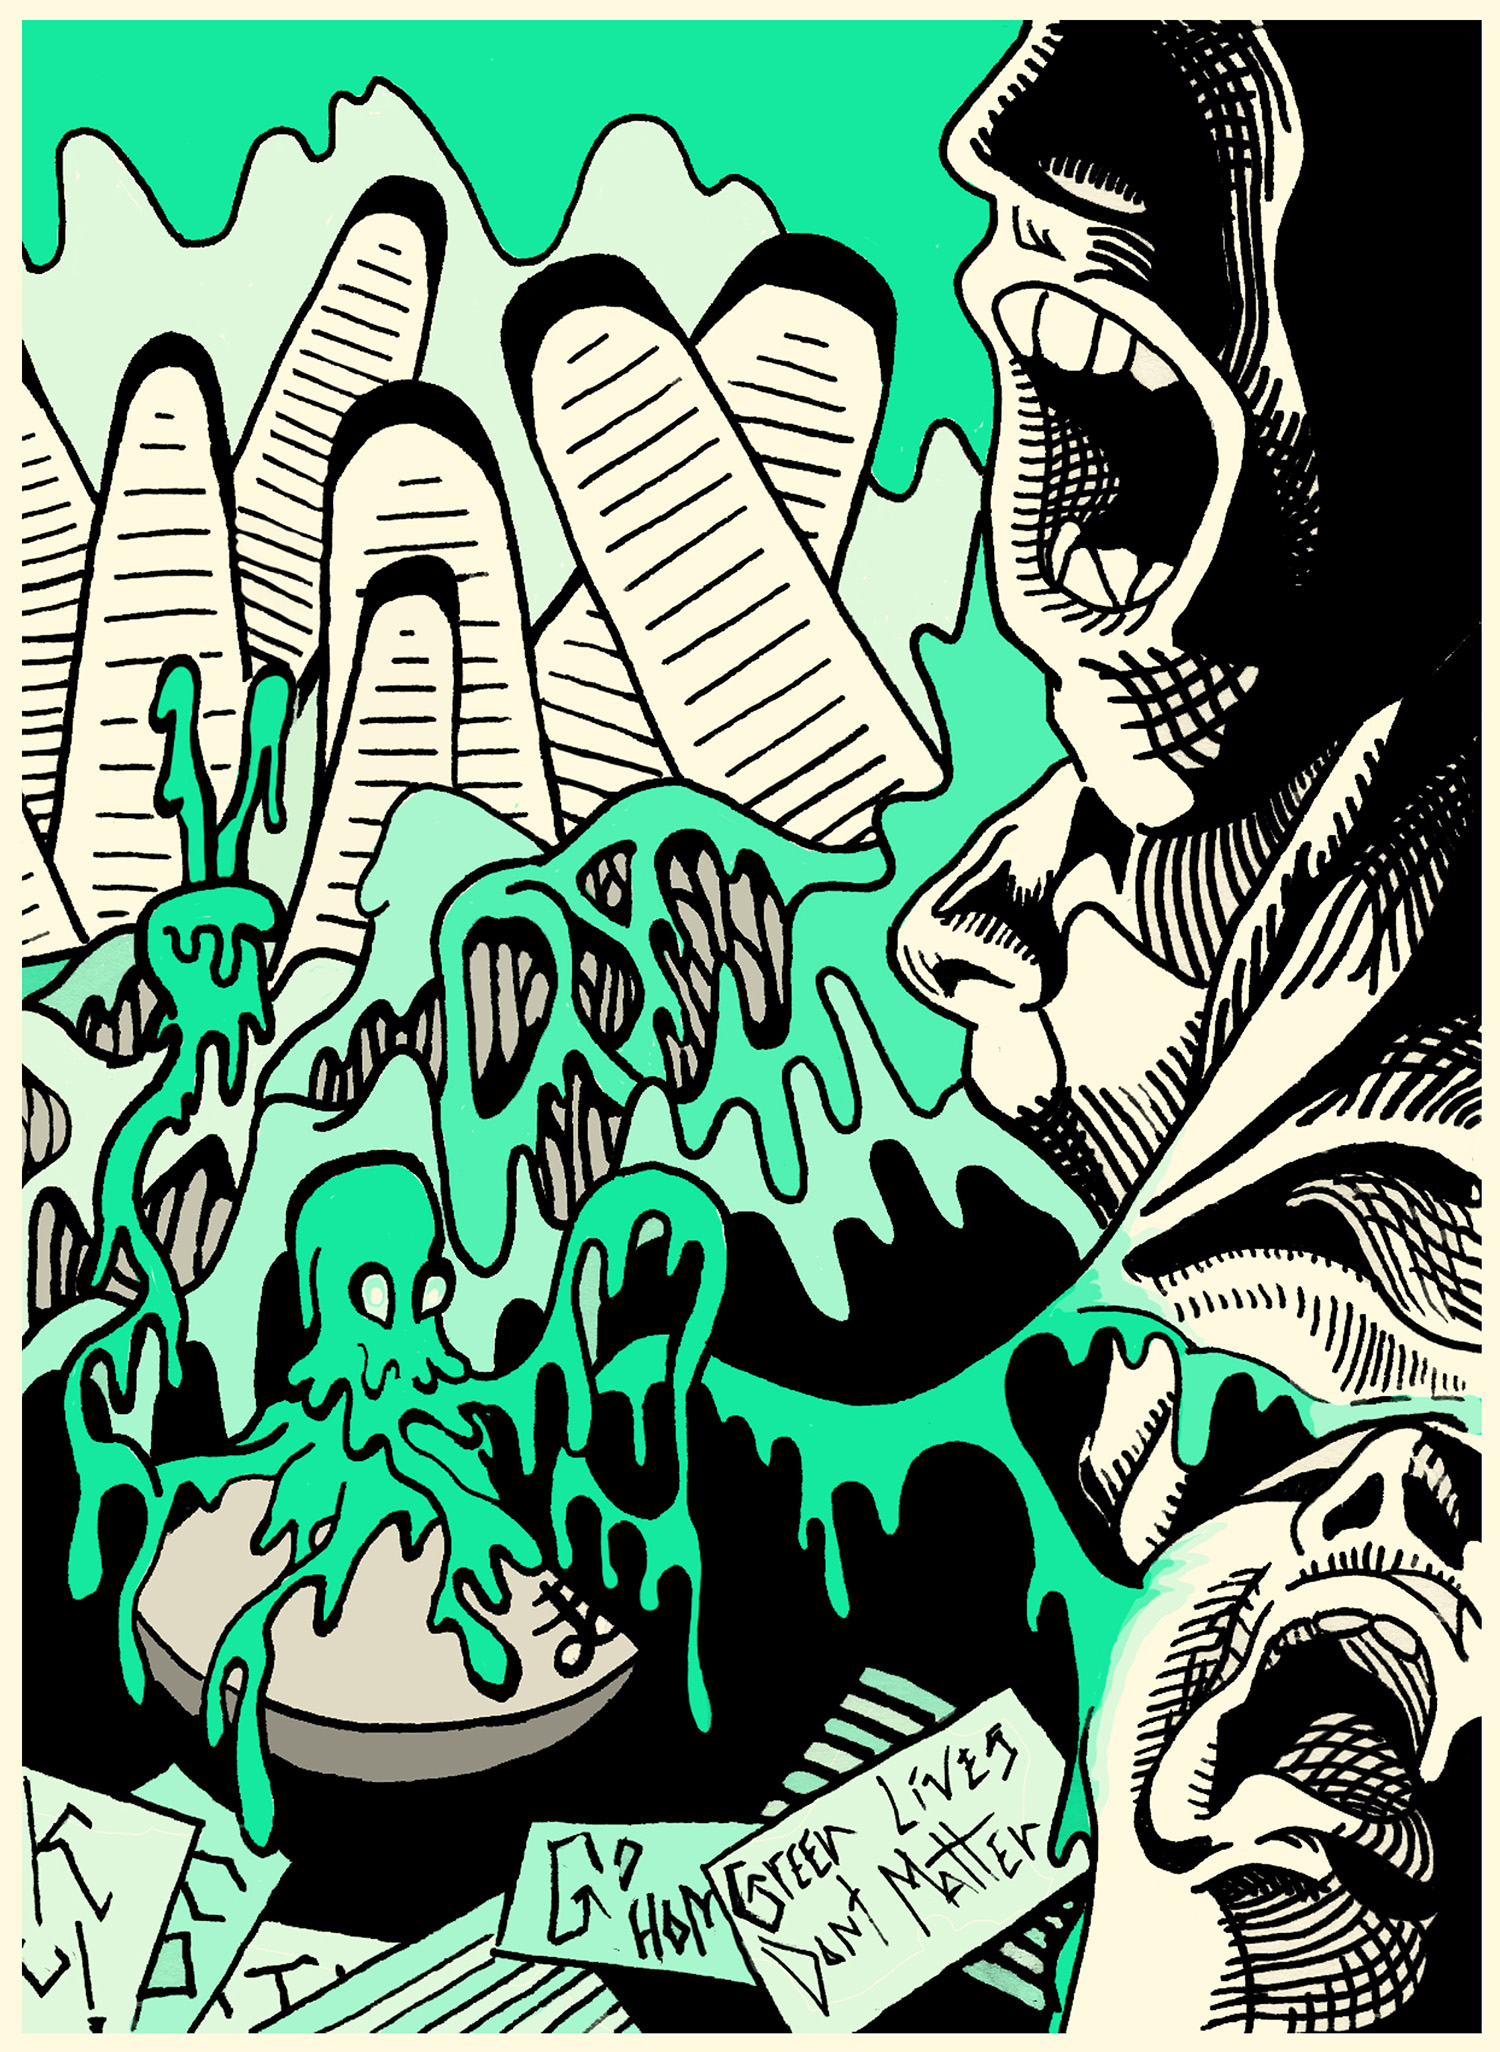 Image in green, black, and cream showing three faces on the right with mouths open. Abstracted buildings are in the background and a slime is moving throughout the image. An abstract alien in the center seems to be producing the slime and cards in the foreground read "Green lives don't matter" and "go home."